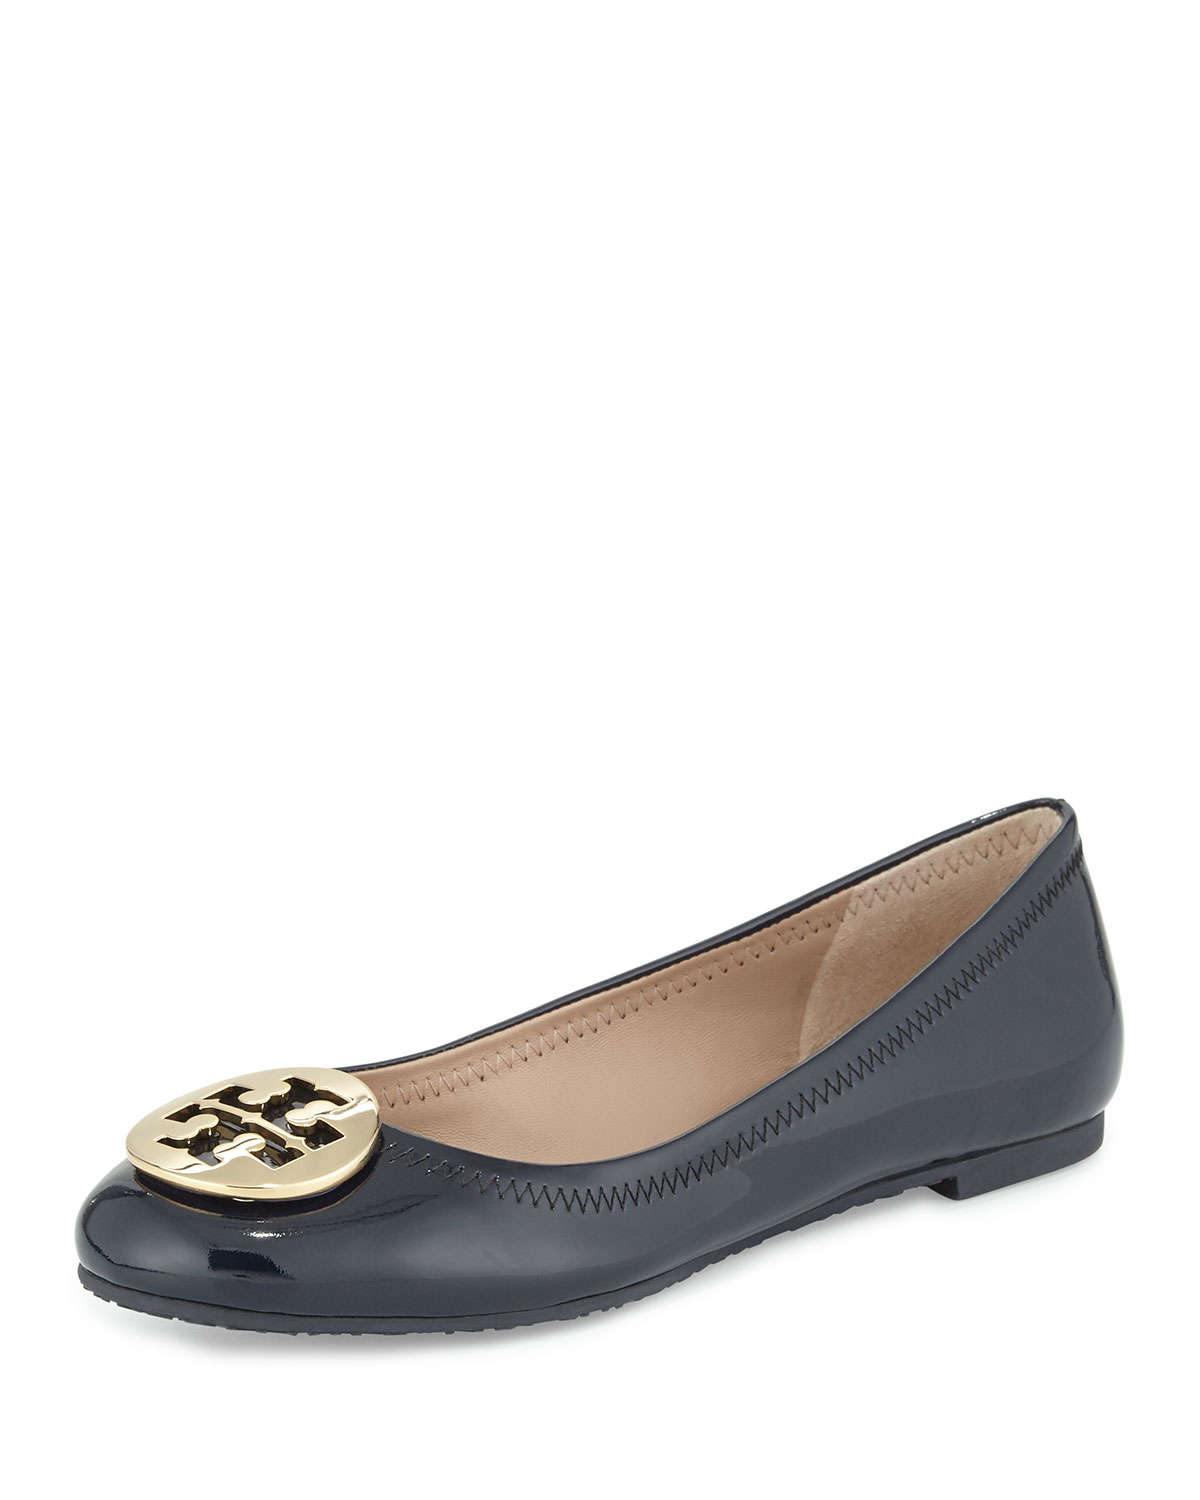 Lyst - Tory burch Reva Patent Leather Ballet Flat in Blue